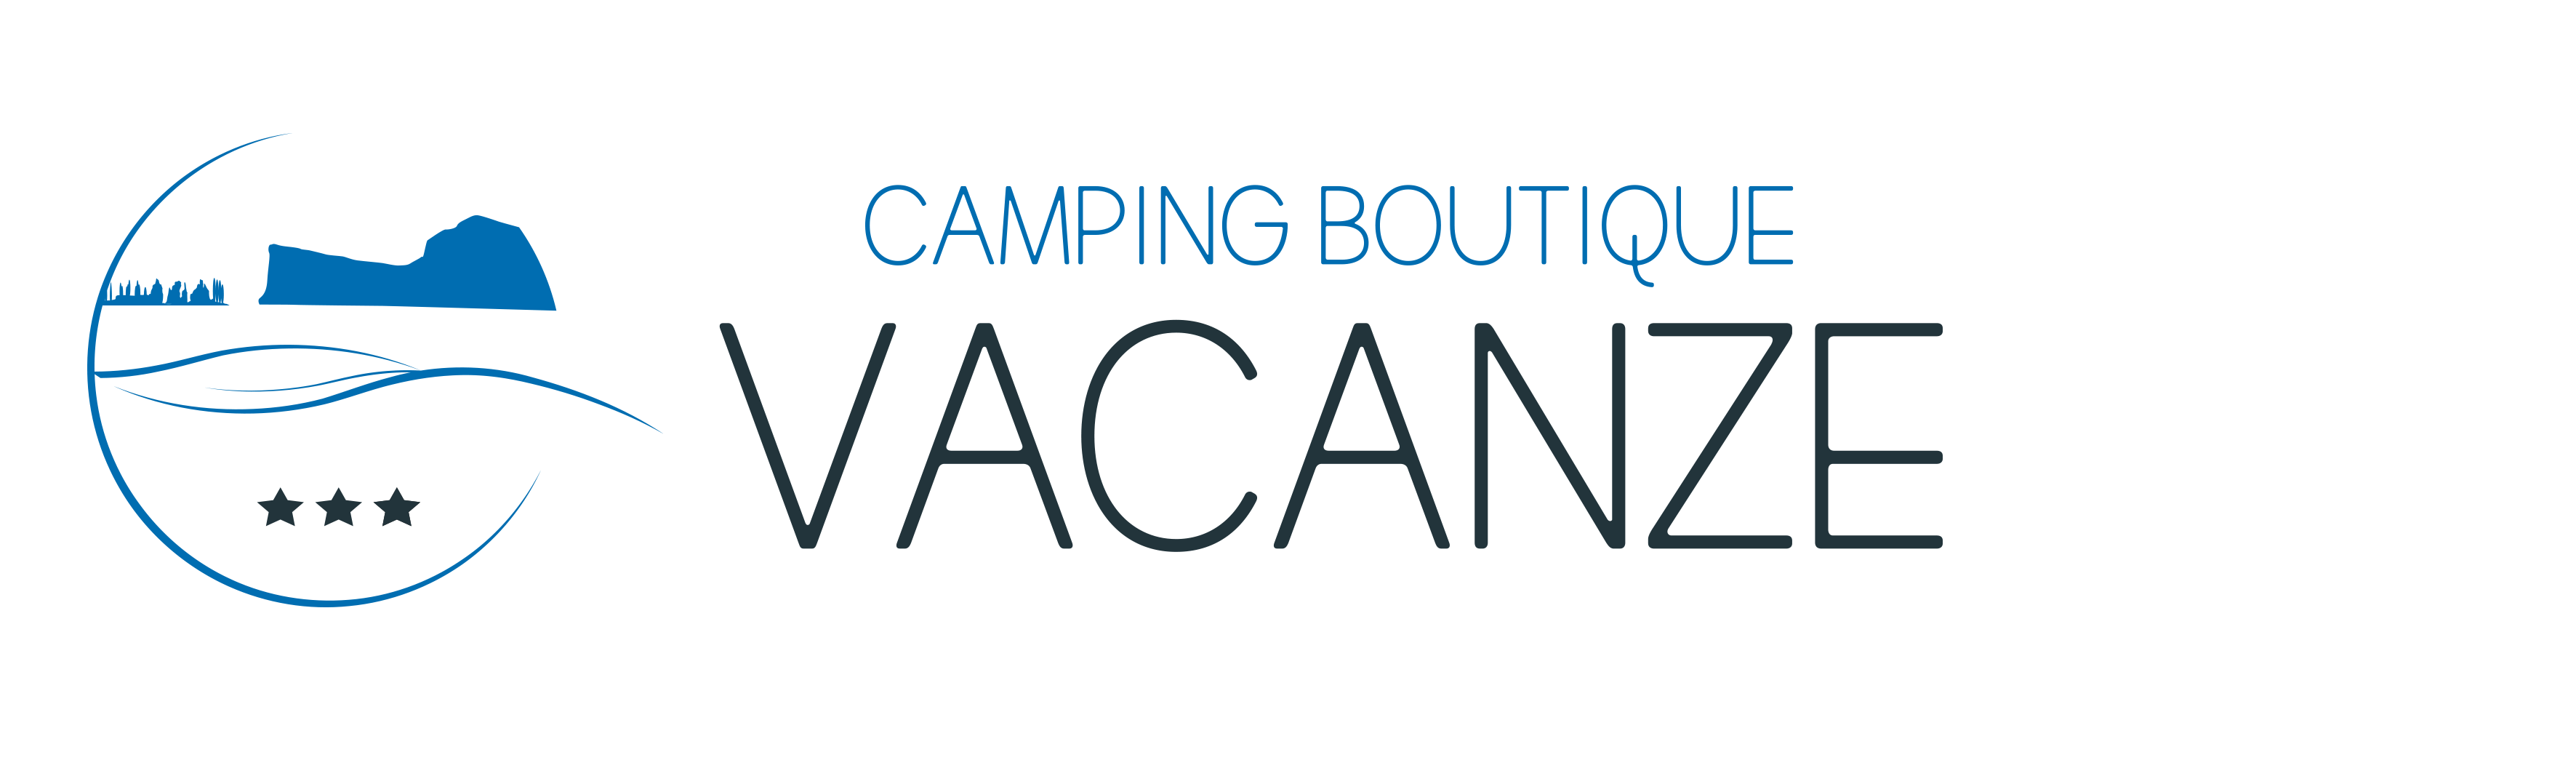 Vacanze Glamping Boutique